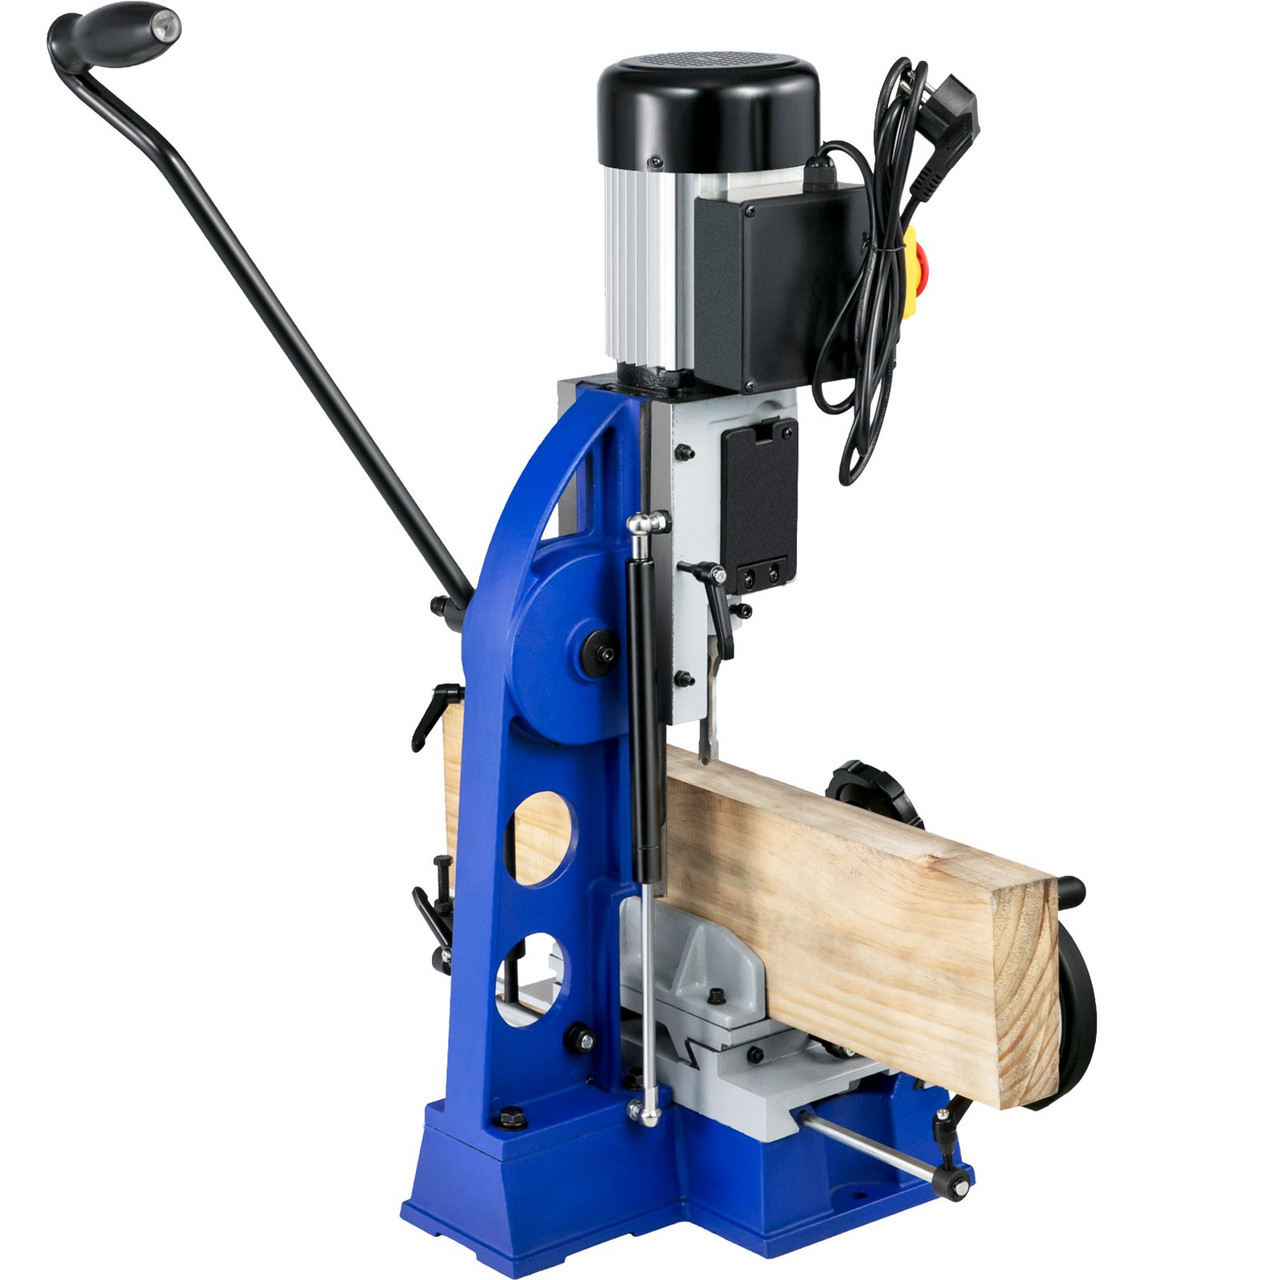 Woodworking Mortise Machine, 1/2 HP 1400RPM Powermatic Mortiser, With Movable Work Bench Benchtop Mortising Machine, For Making Round Holes Square Holes Or Special Square Holes In Wood